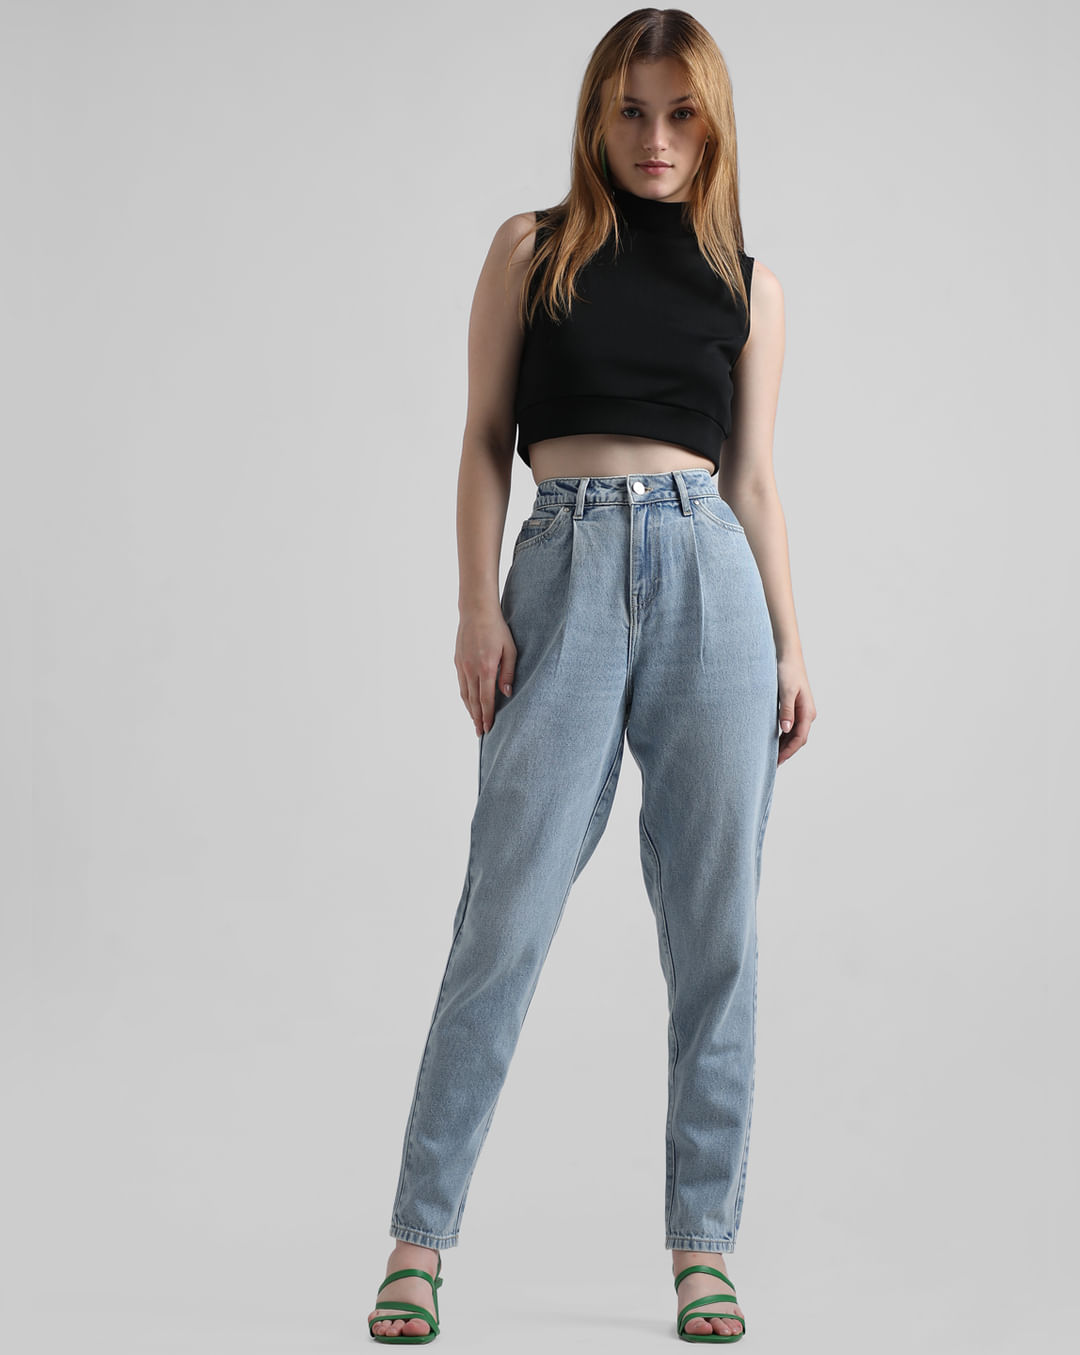 High-Waisted Mom Jean  High waisted mom jeans, Cute casual outfits, Black  mom jeans outfit